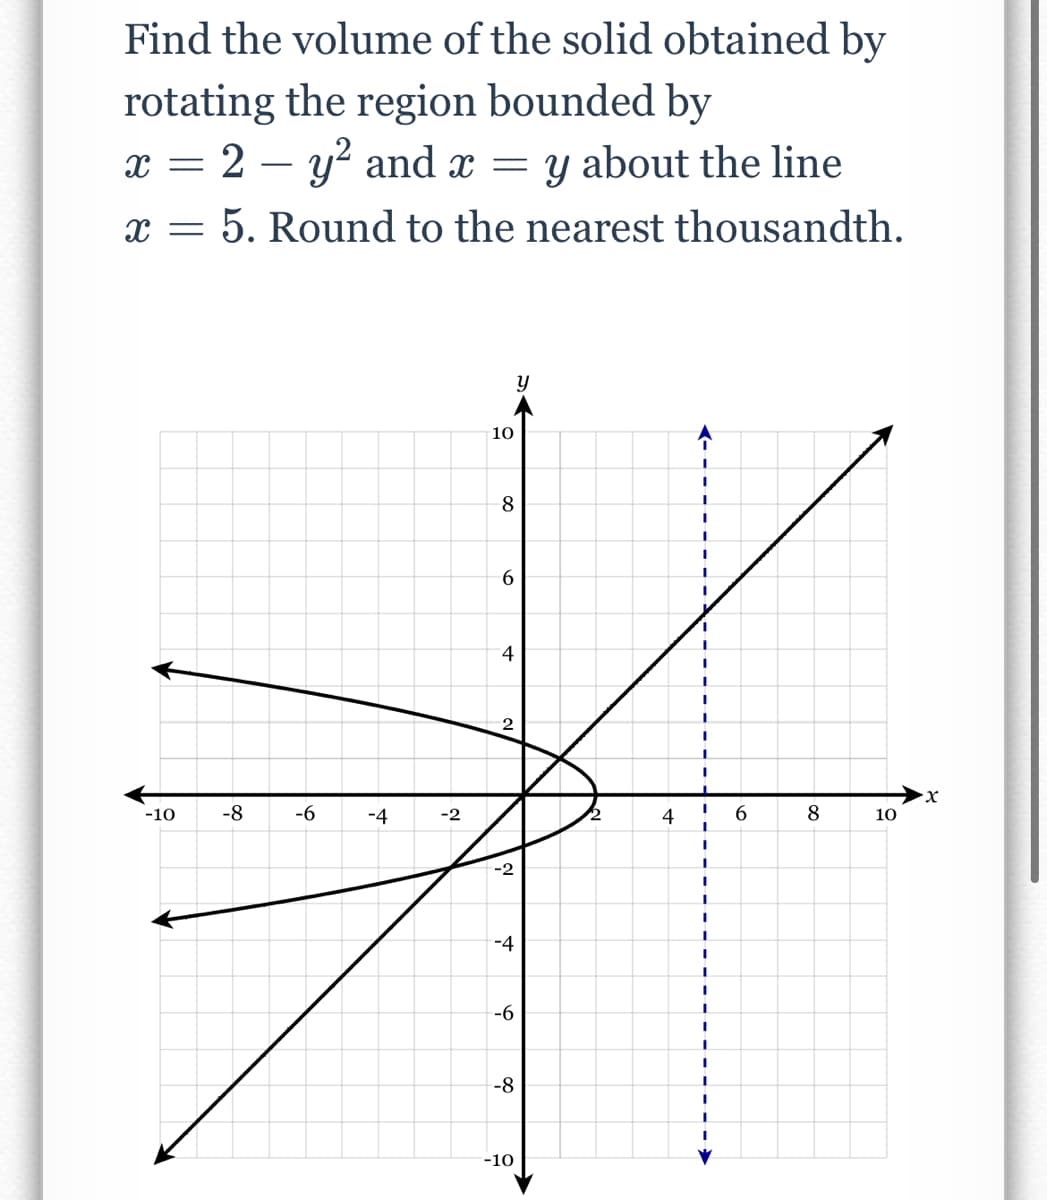 Find the volume of the solid obtained by
rotating the region bounded by
x = 2 – y? and x = y about the line
x = 5. Round to the nearest thousandth.
10
8
9.
4
-10
-8
-6
-4
-2
4
6.
8
10
-2
-4
-6
-8
-10
